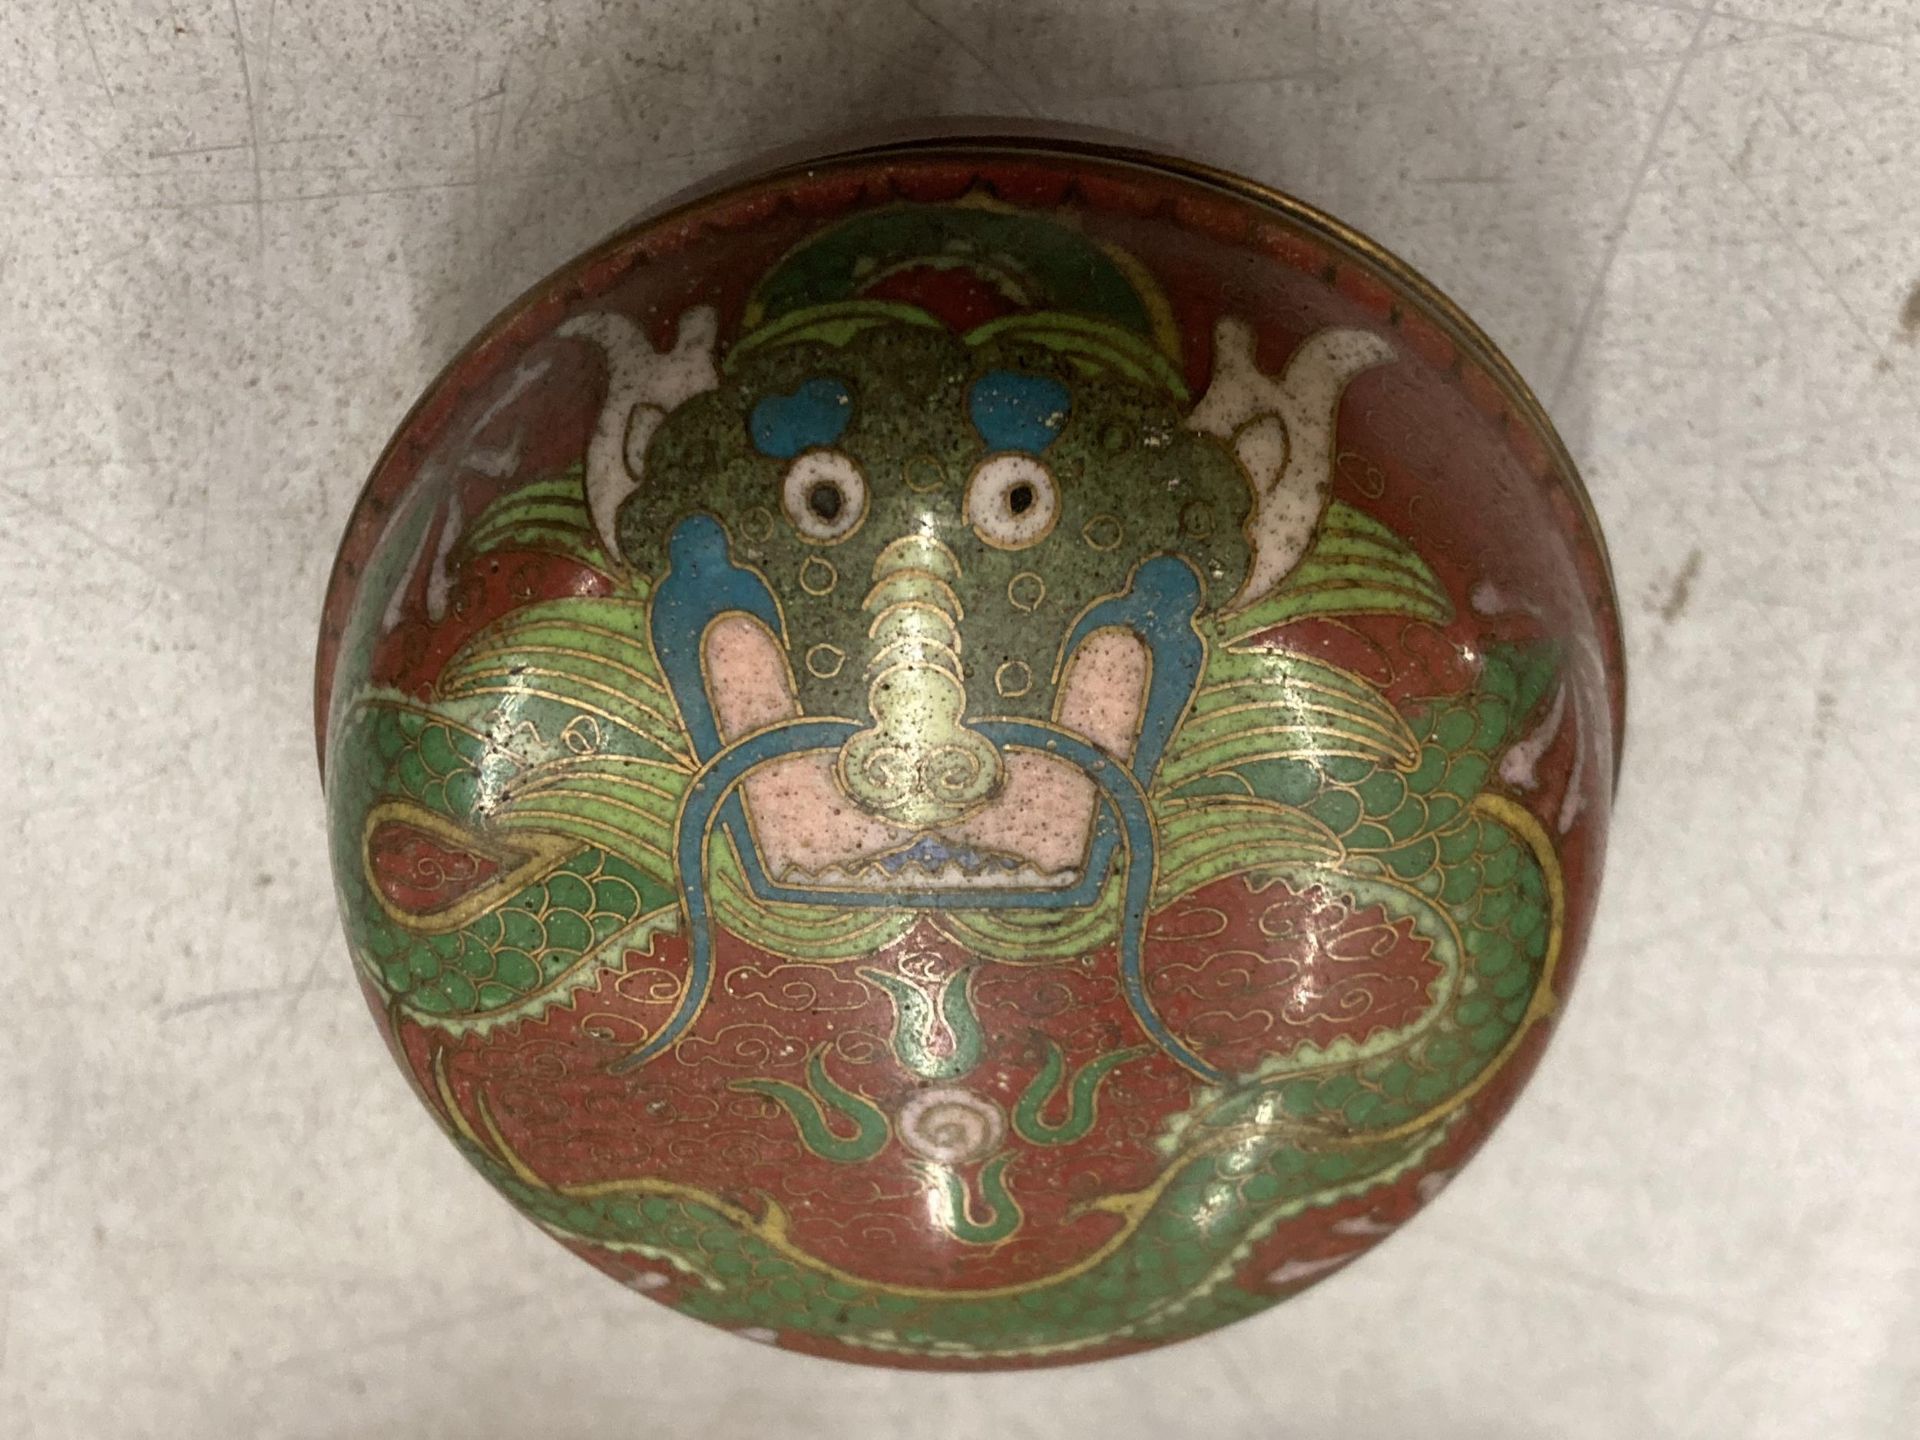 THREE CLOISONNE ITEMS WITH DRAGON DETAIL TO INCLUDE TWO PIN TRAYS AND A TRINKET BOX - Image 4 of 4